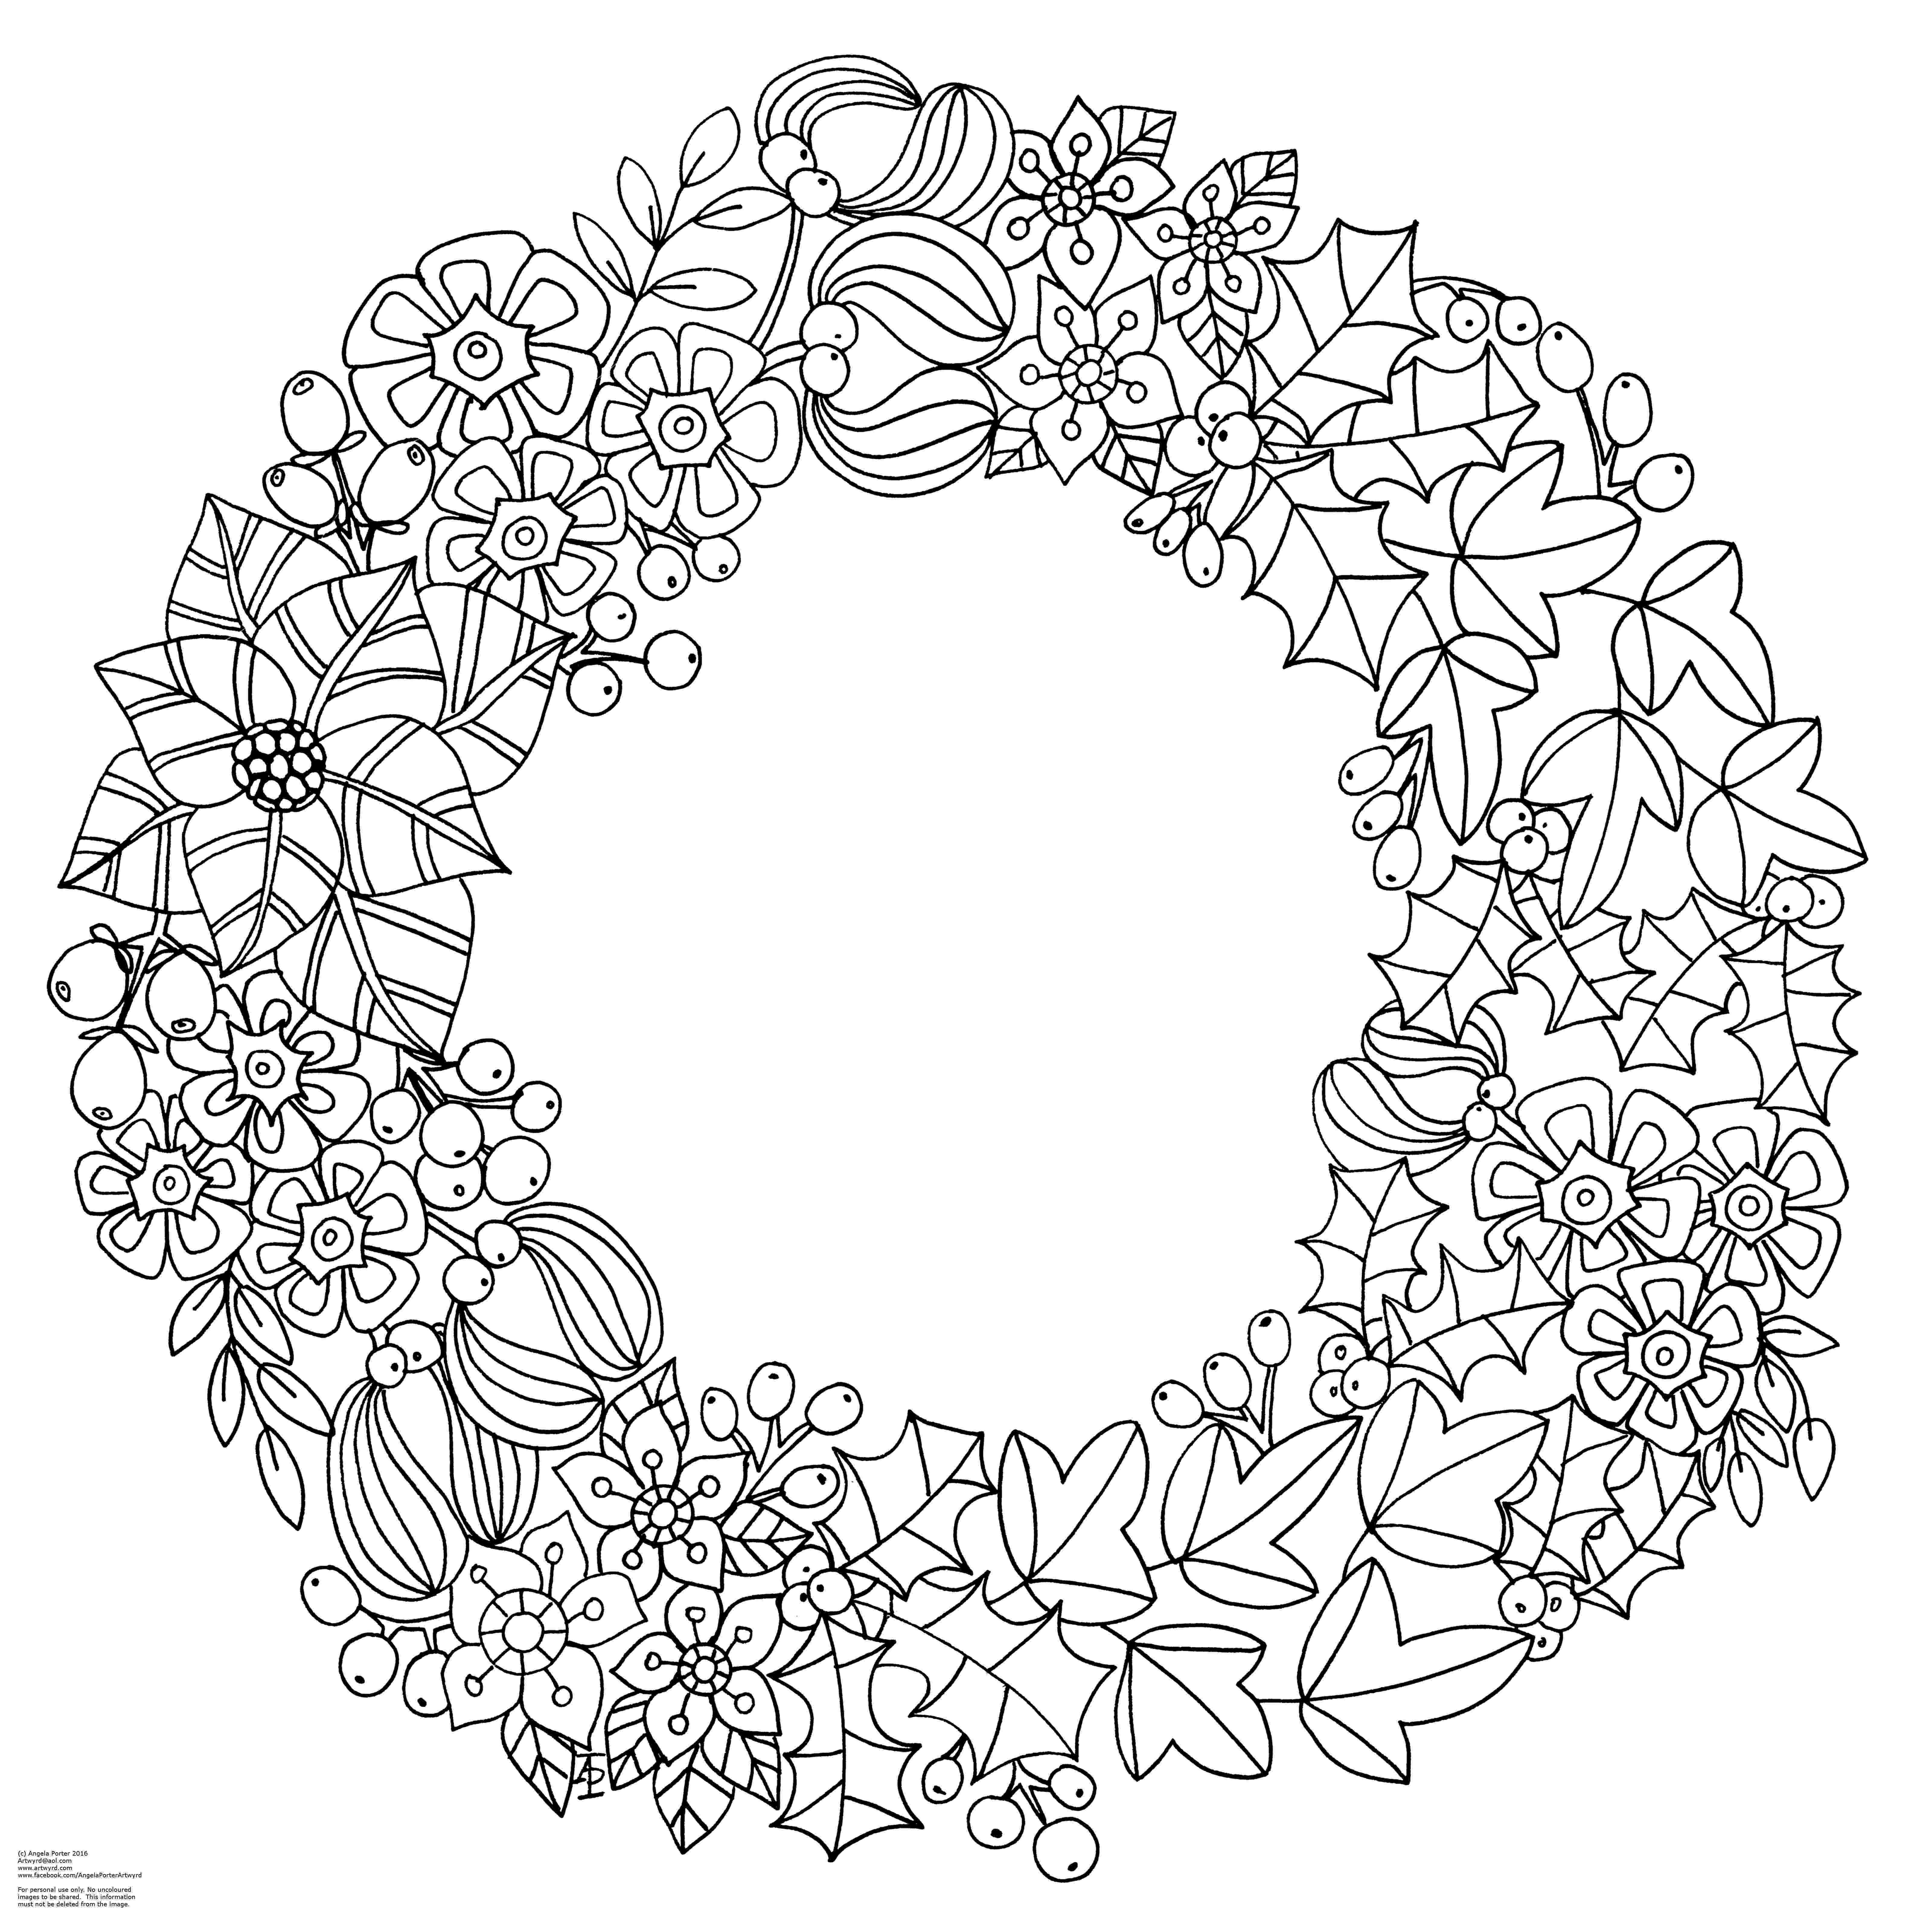 christmas wreaths coloring pages christmas wreath coloring pages wreath ornaments learn christmas wreaths coloring pages 